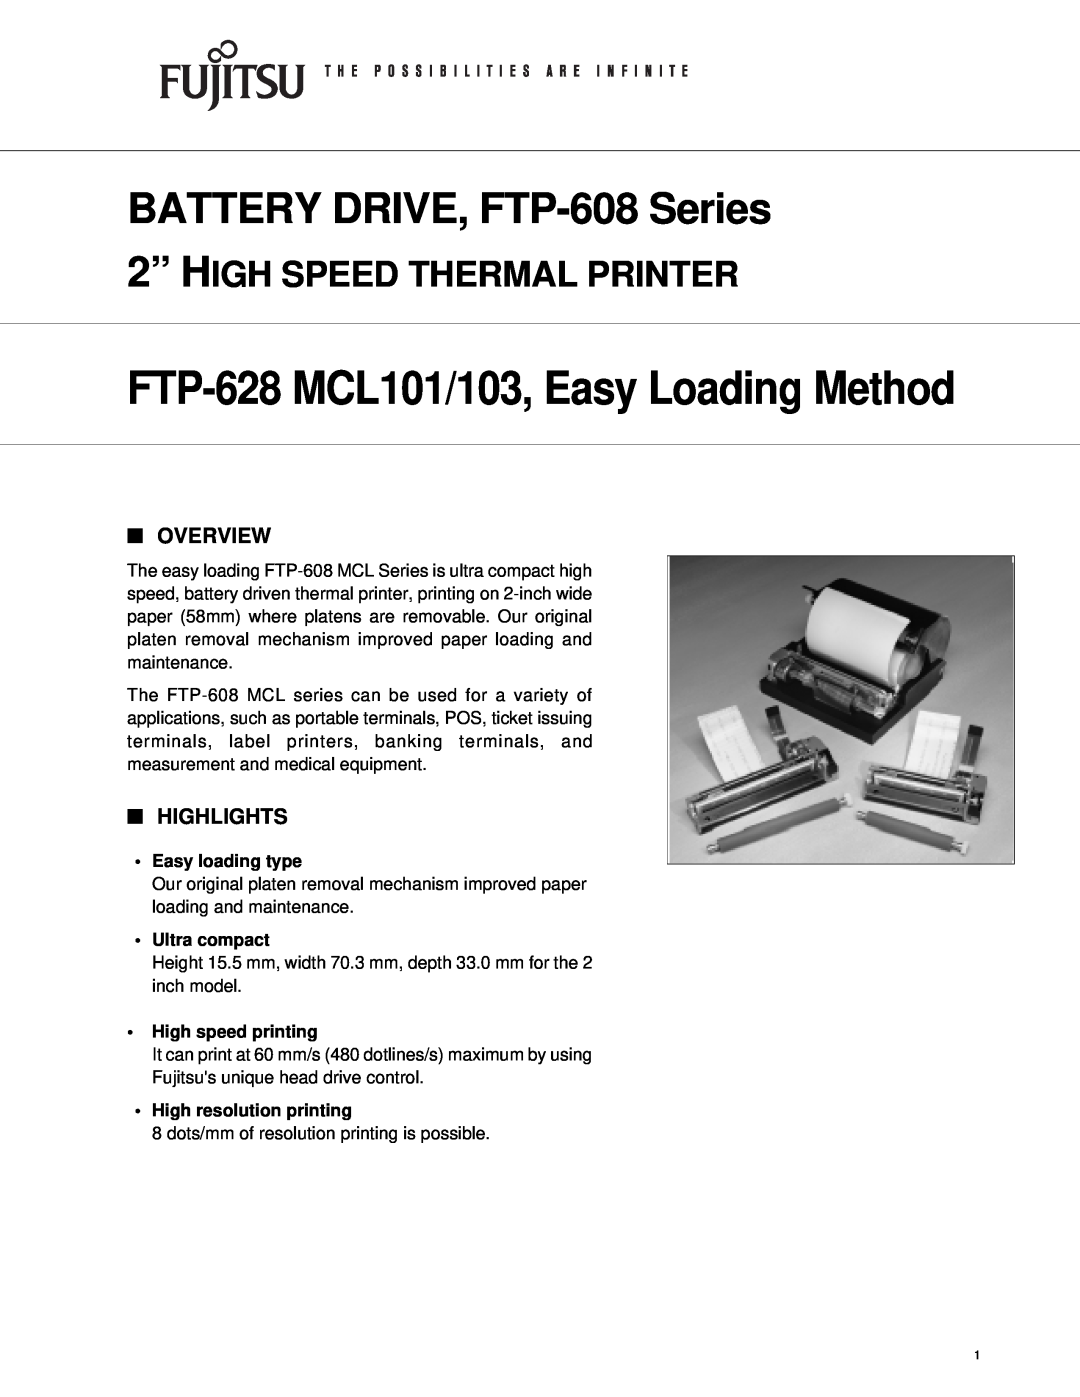 Fujitsu FTP-628MCL101, FTP-628MCL103 manual Overview, Highlights, Easy loading type, Ultra compact, High speed printing 